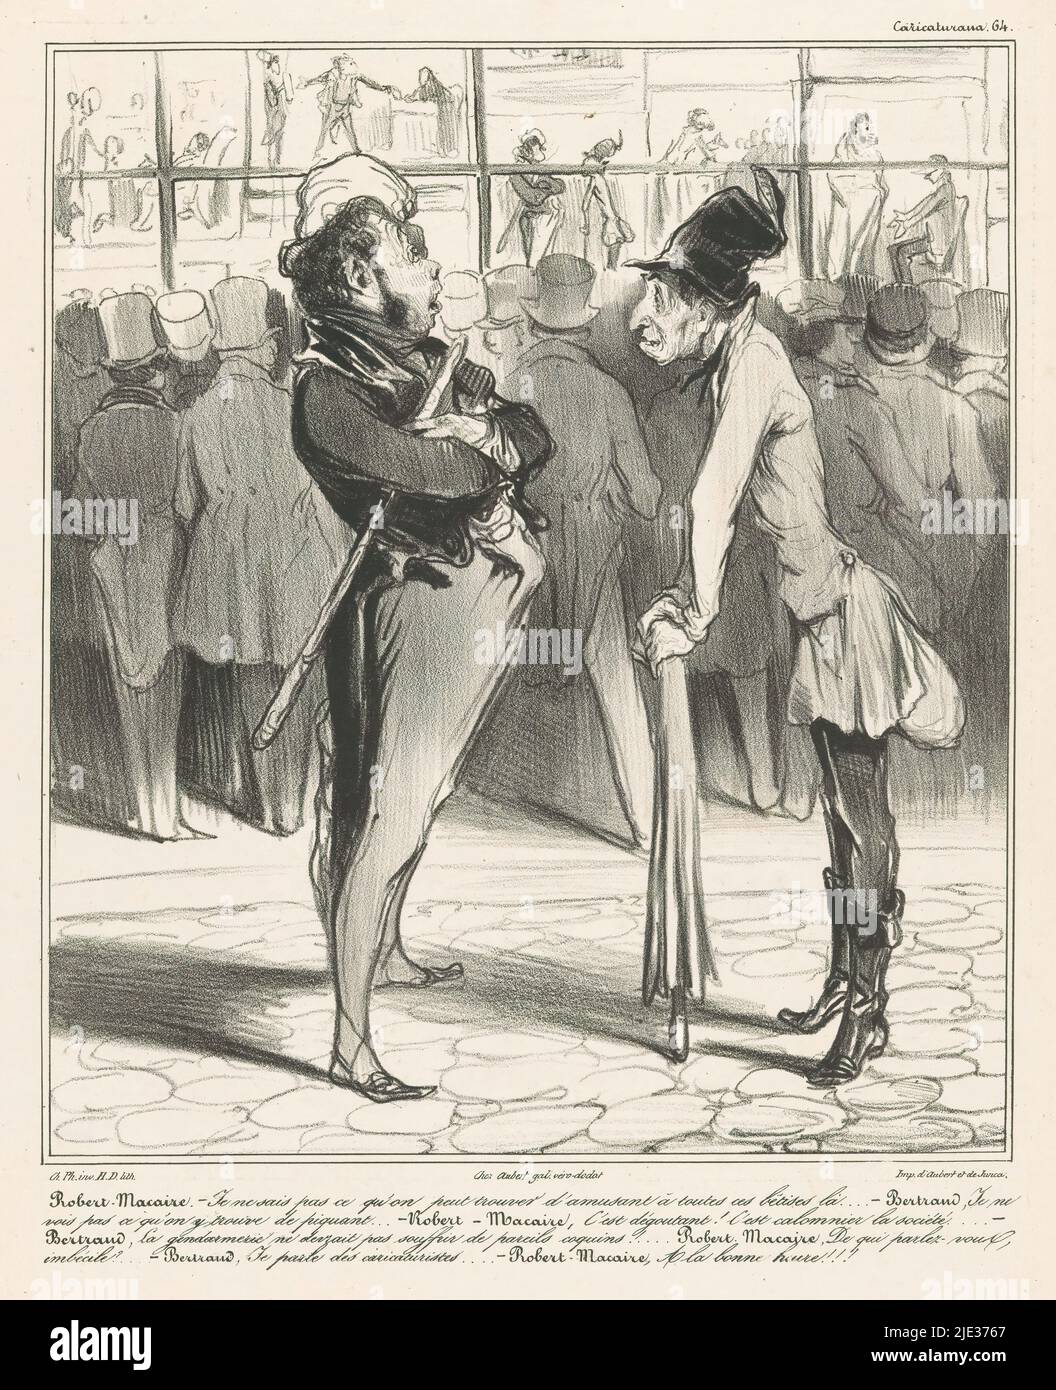 Robert-Macaire in conversation with Bertrand in front of the window of a print shop, Caricaturana (series title on object), print maker: Honoré Daumier, after design by: Charles Philipon, (mentioned on object), printer: Aubert & Junca, (mentioned on object), Paris, 1838, paper, height 358 mm × width 272 mm Stock Photo